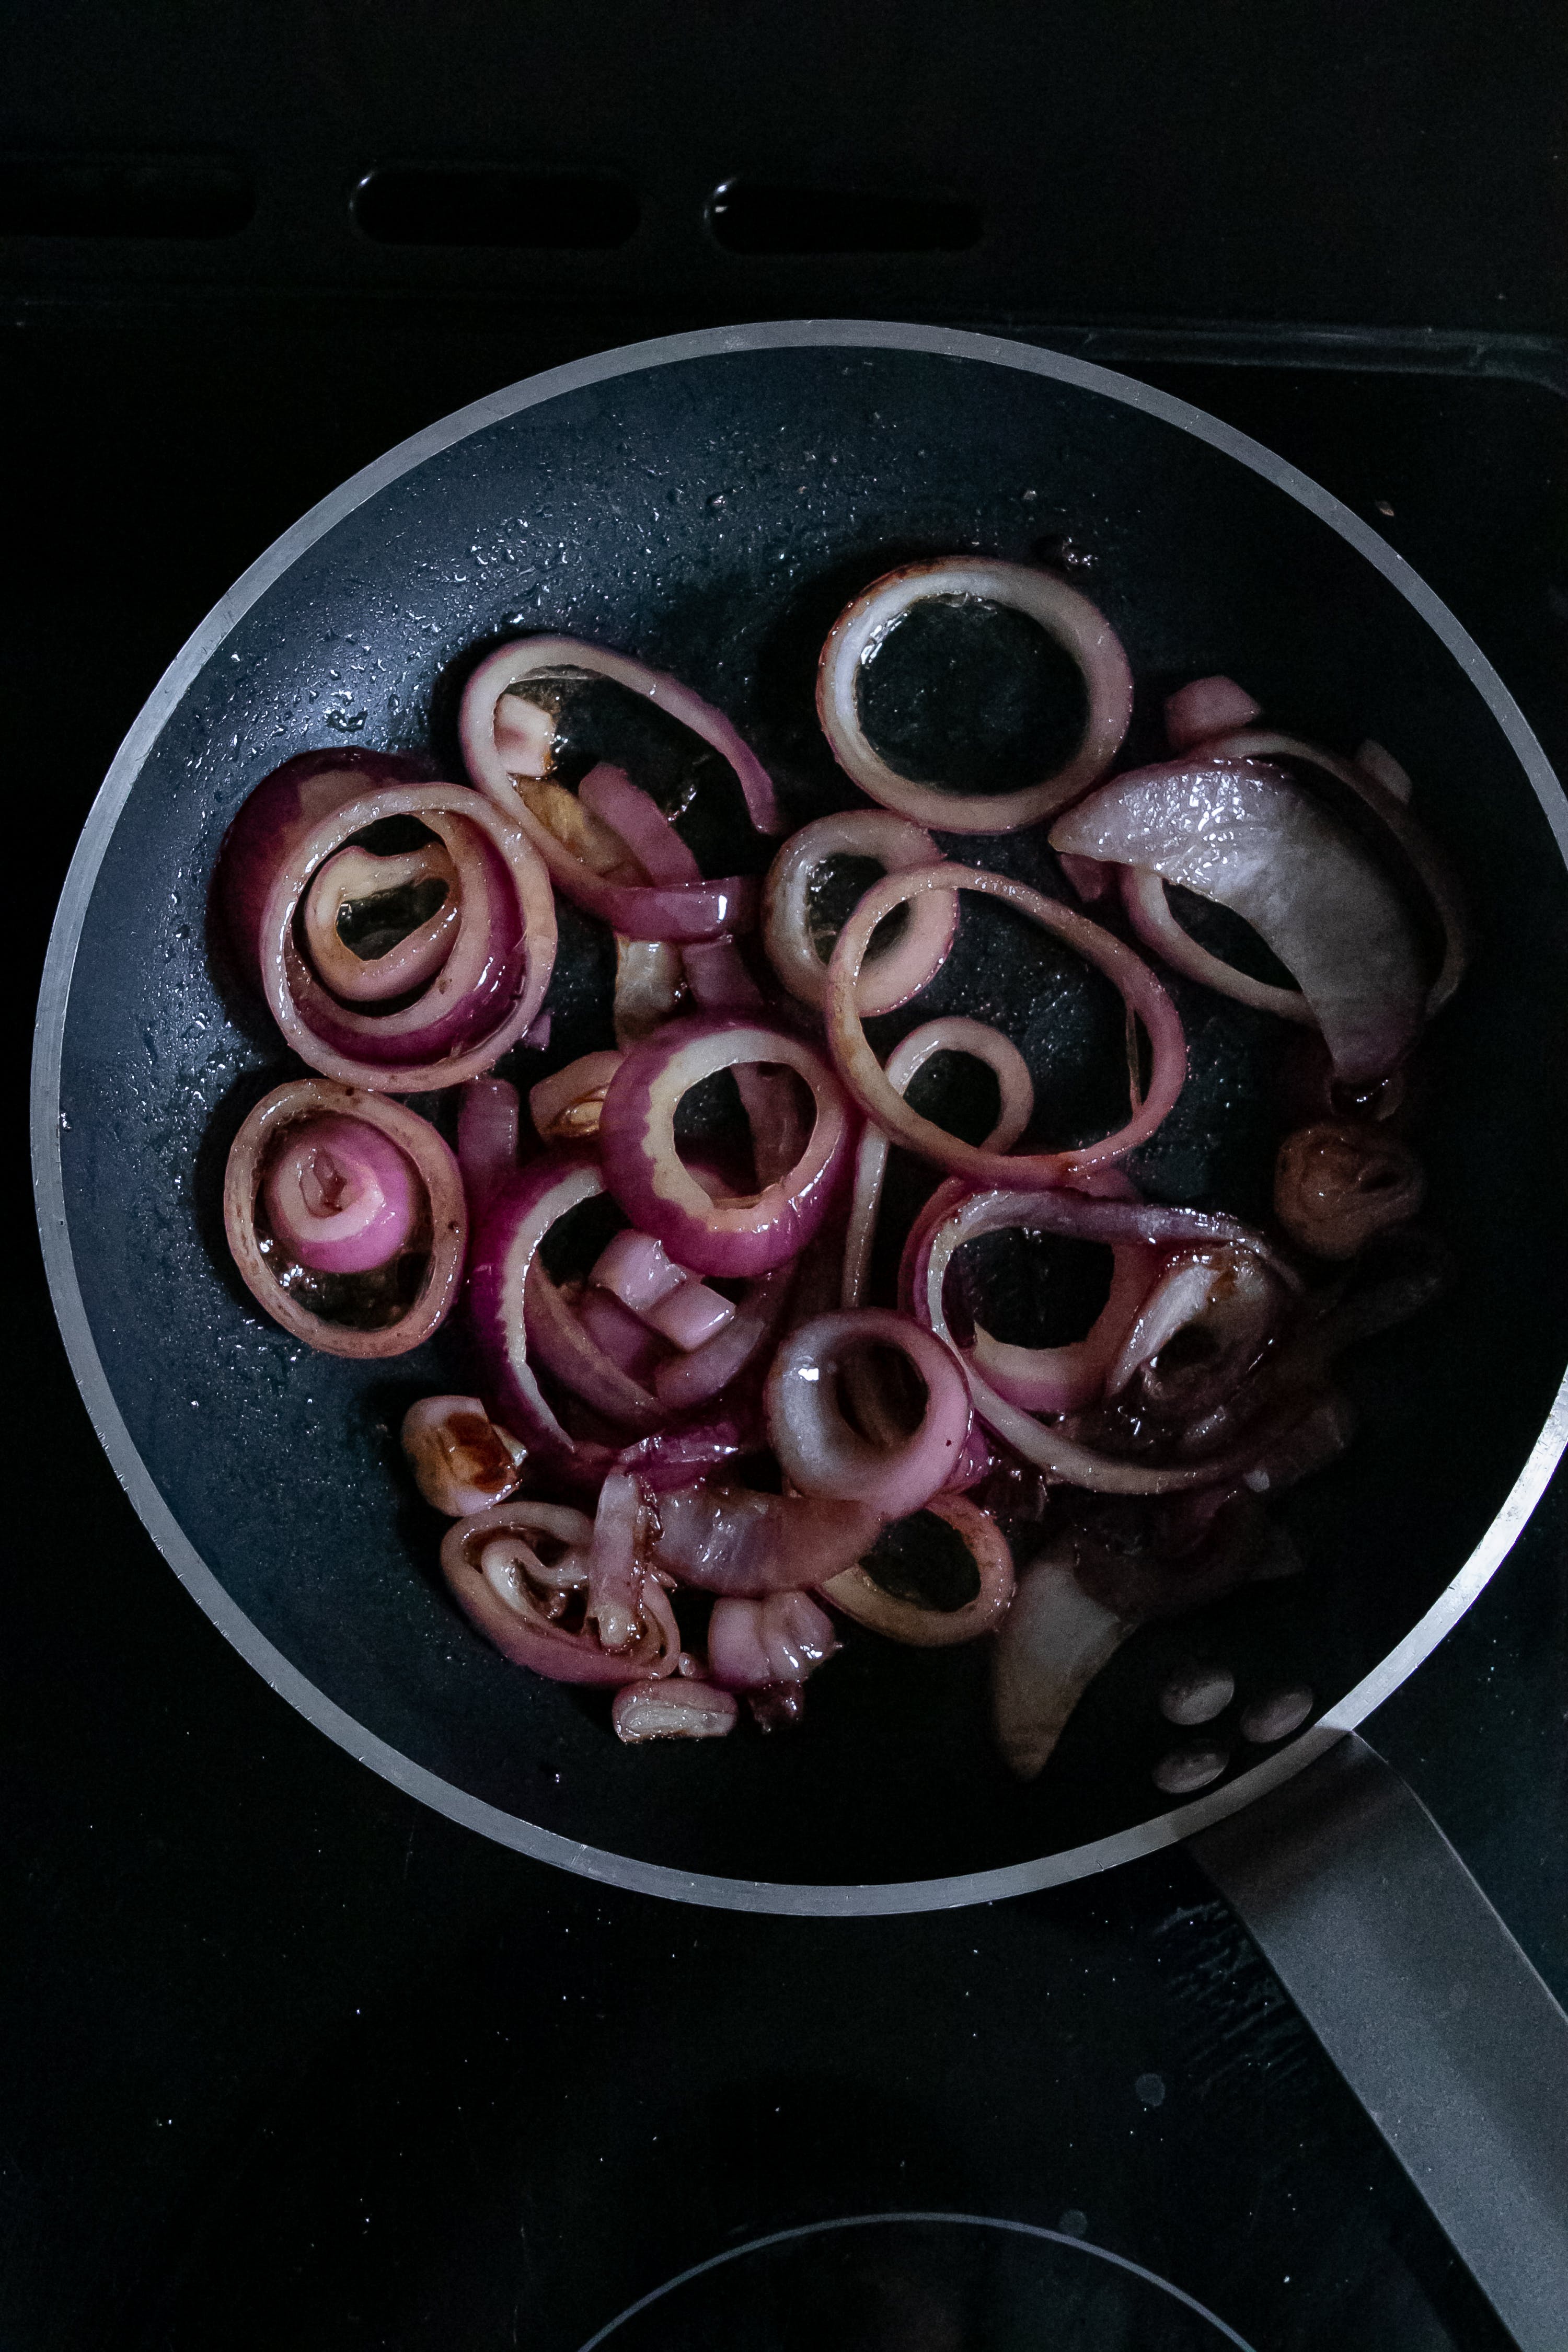 Onions cooking in a pan | Source: Pexels